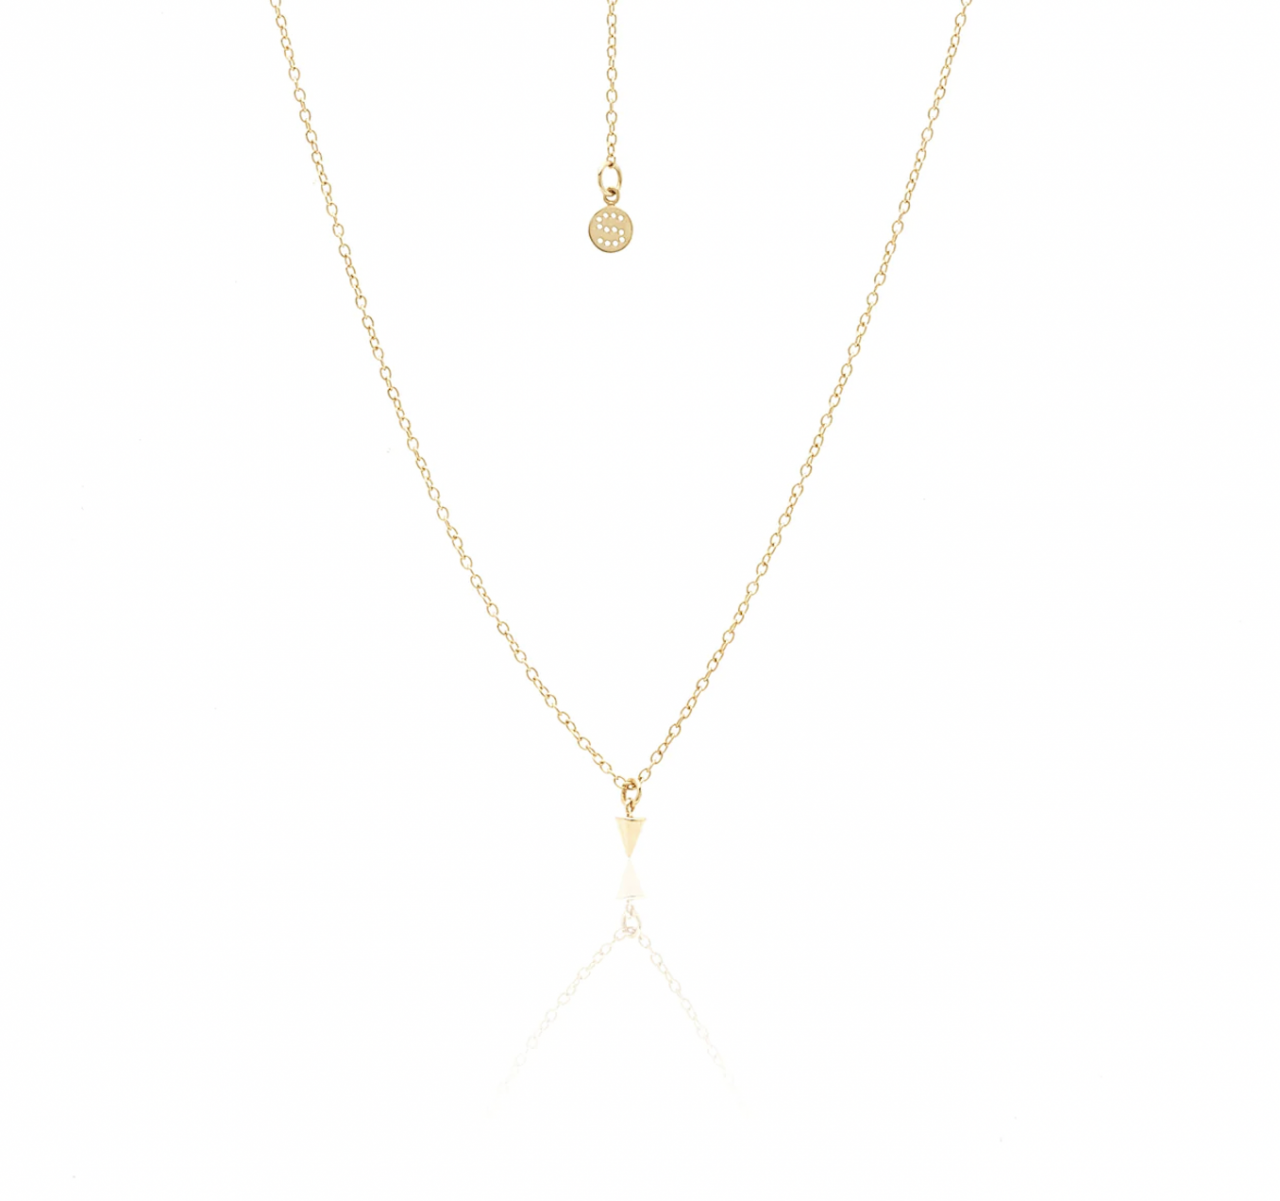 Silk and Steel Mini Spike Necklace in 14ct Plated Gold